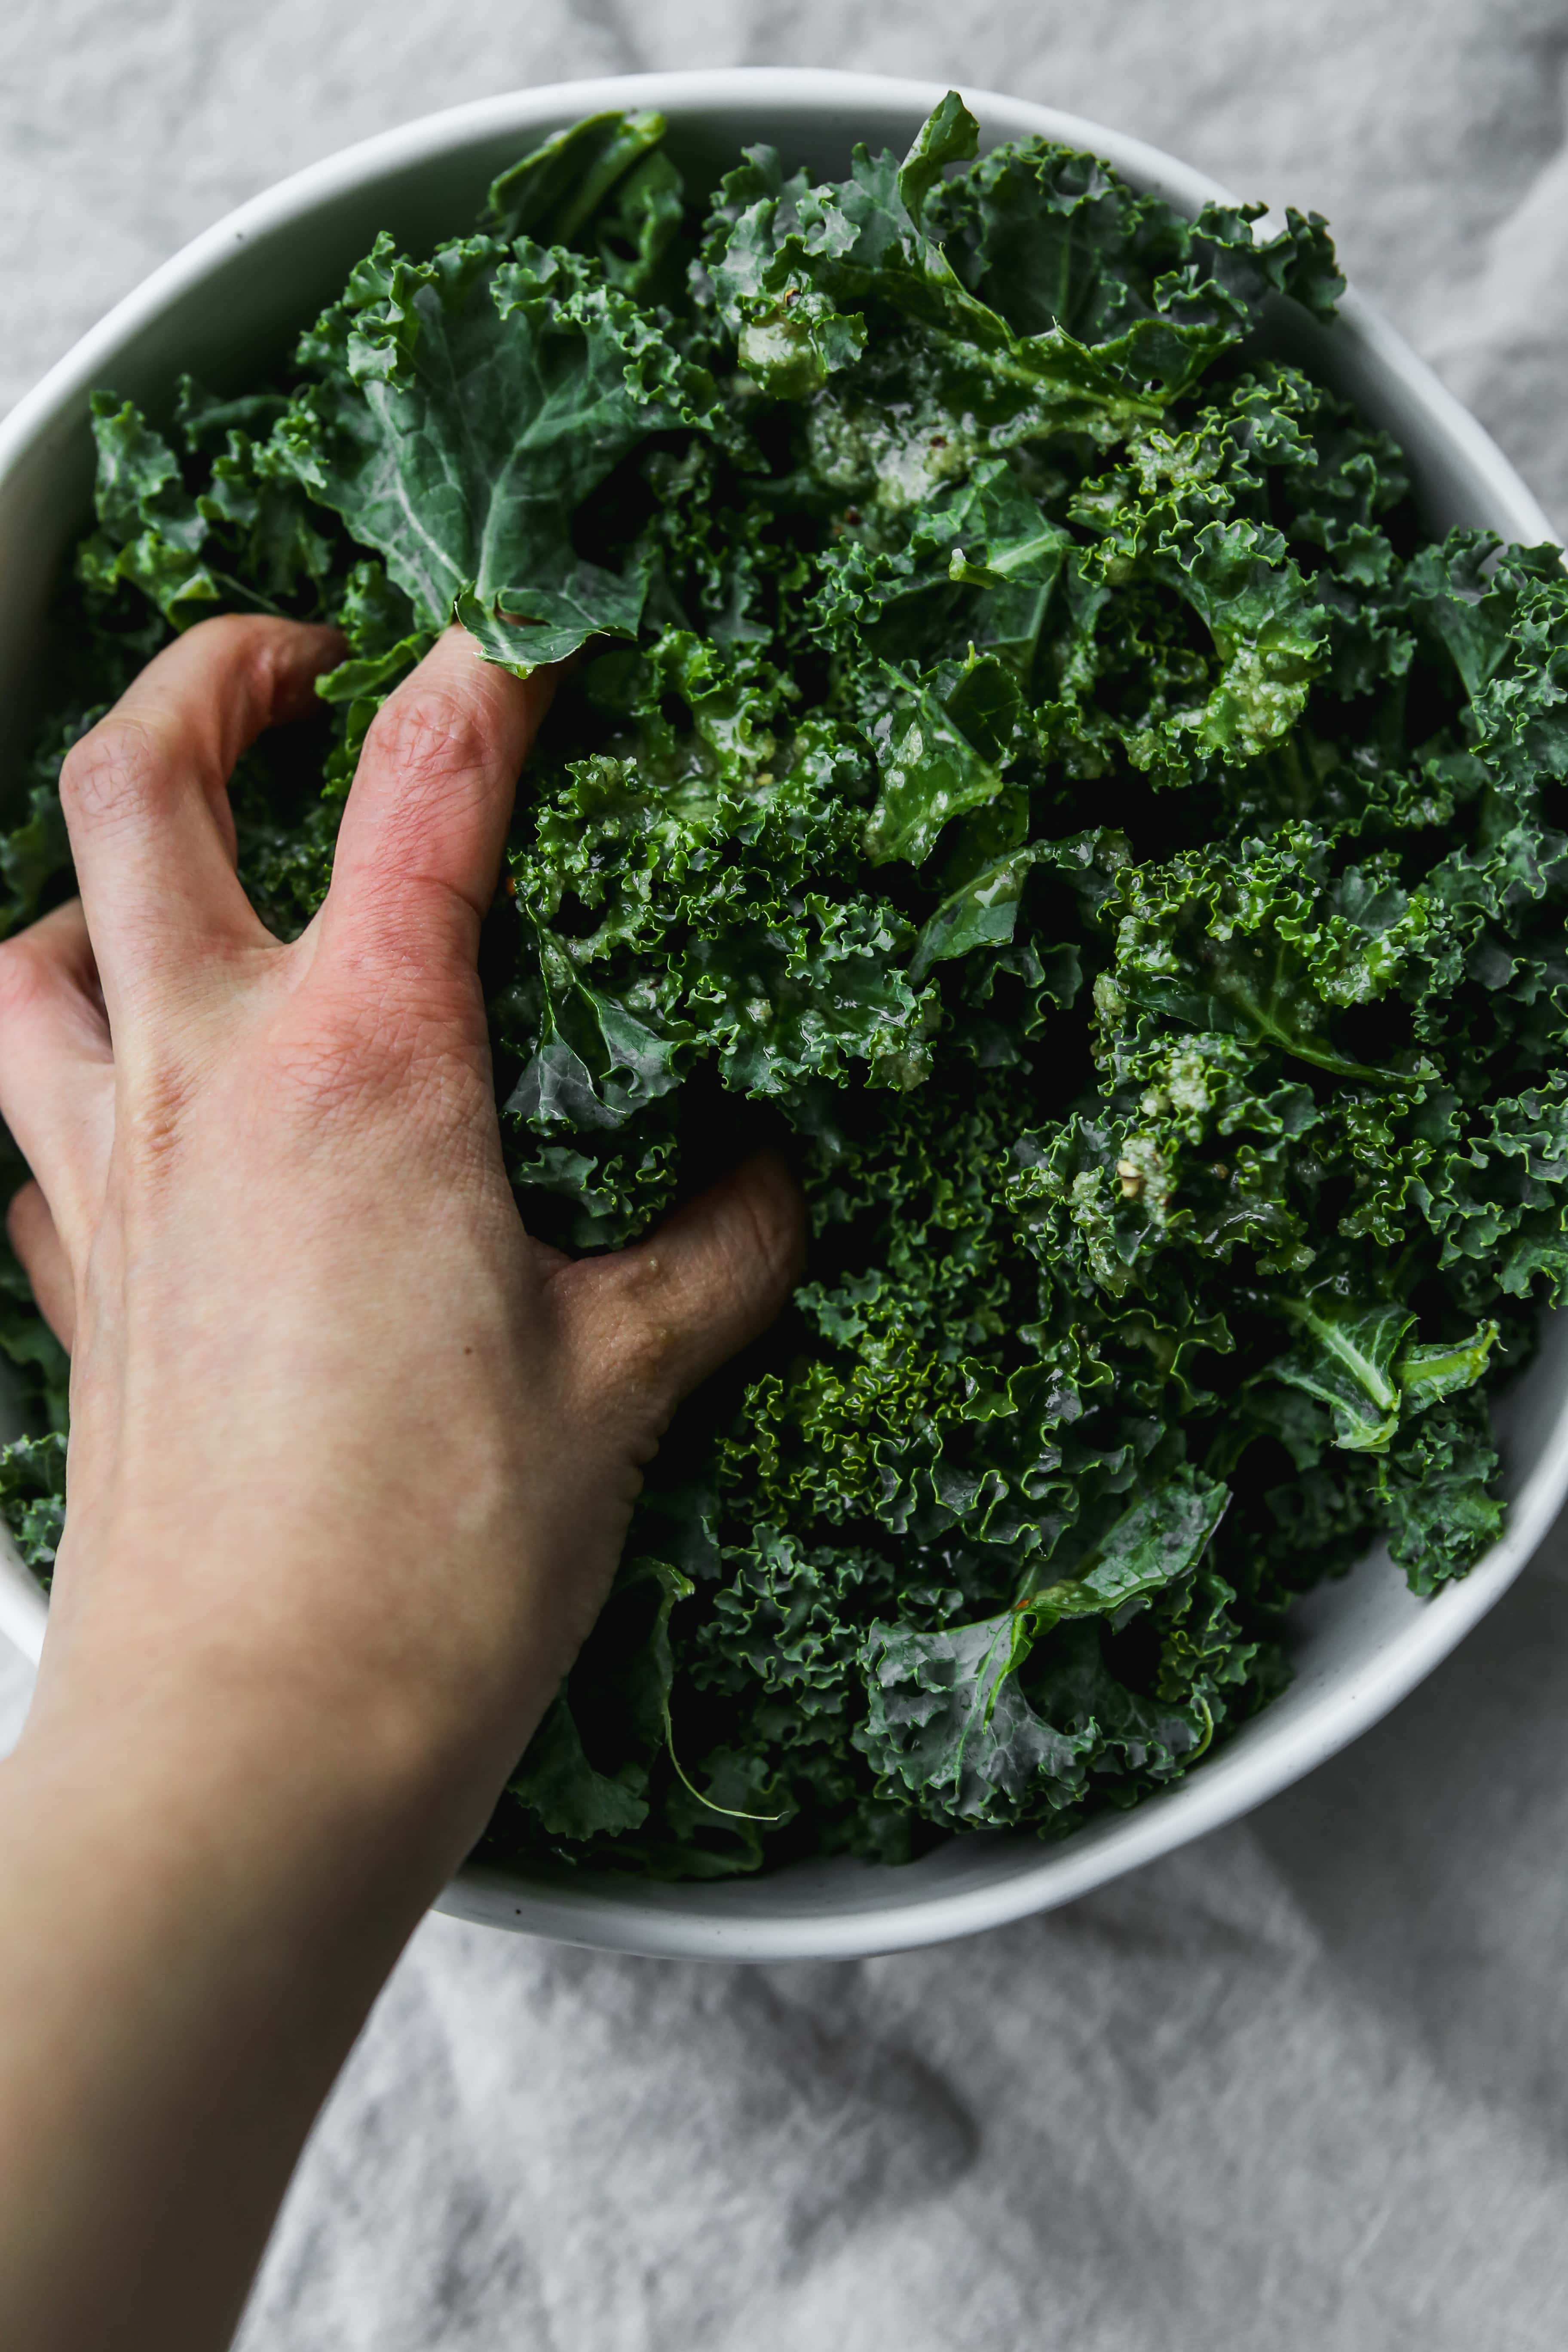 Overhead photo of a hand massaging kale leaves in a bowl.